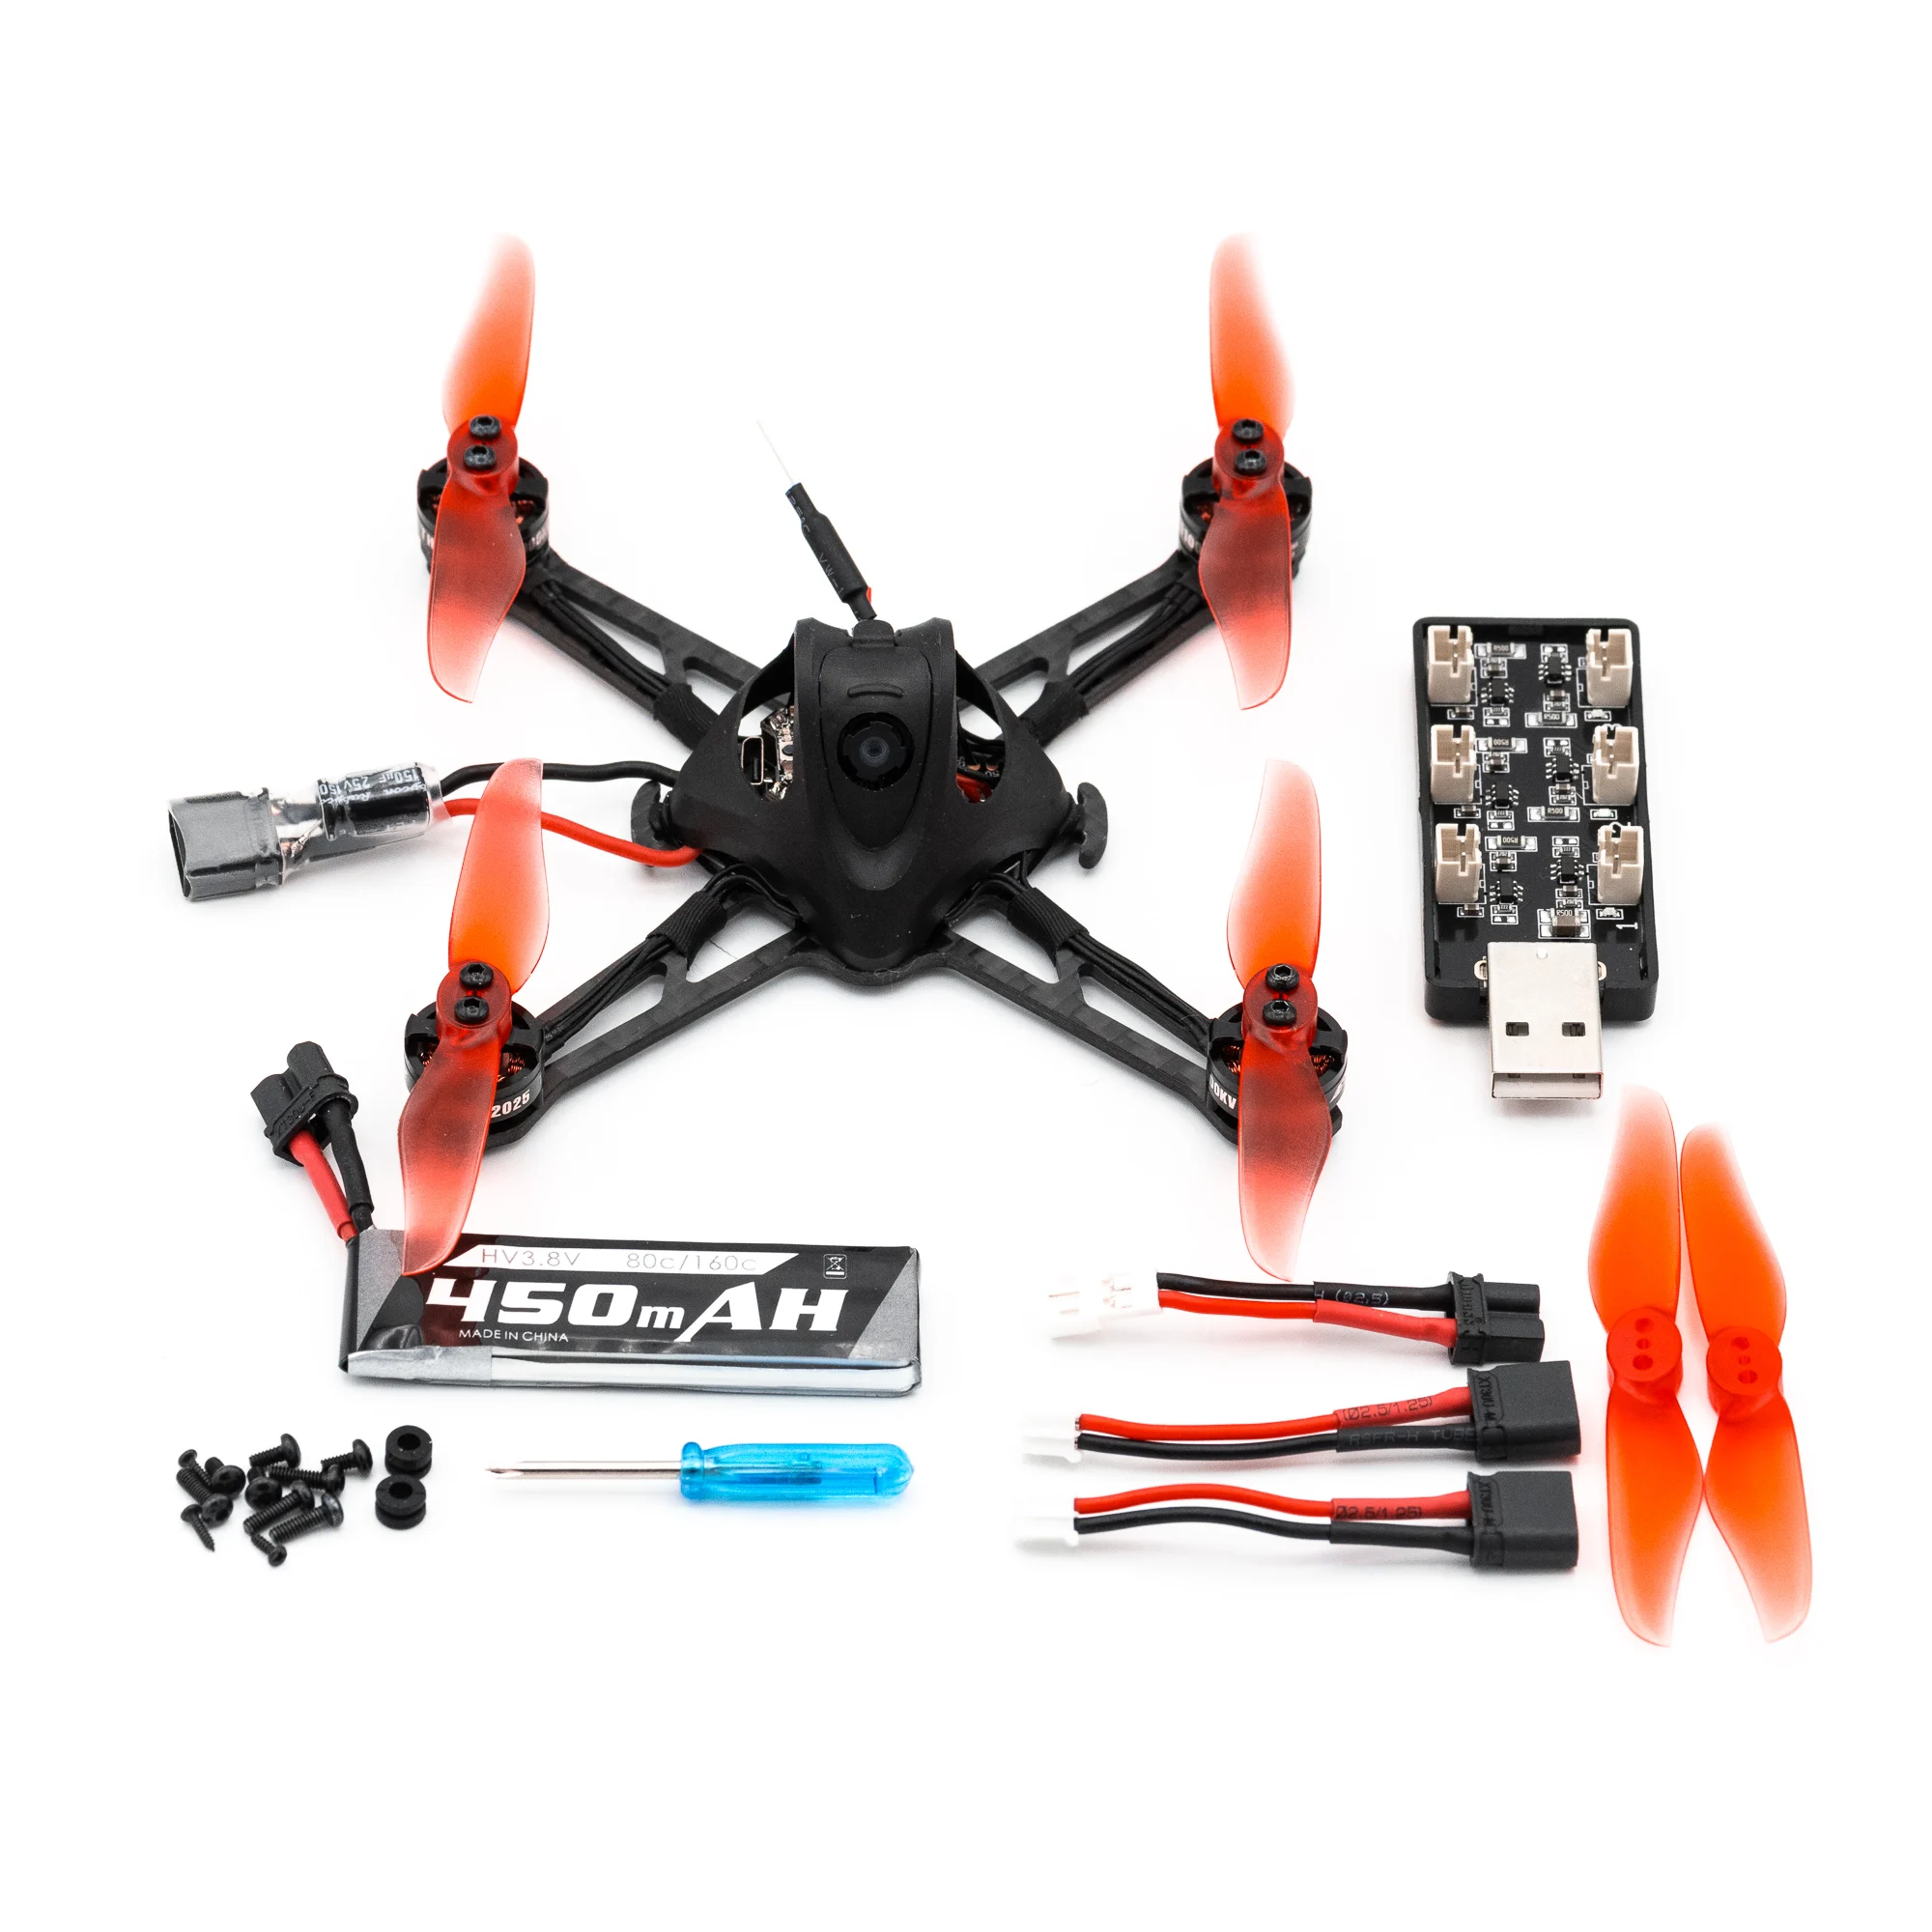 

41g EMAX Official Nanohawk X F4 1S 3 Inch BNF Lightweight Outdoor FPV Racing Drone TH12025 11000KV Motor RC Airplane Quadcopter